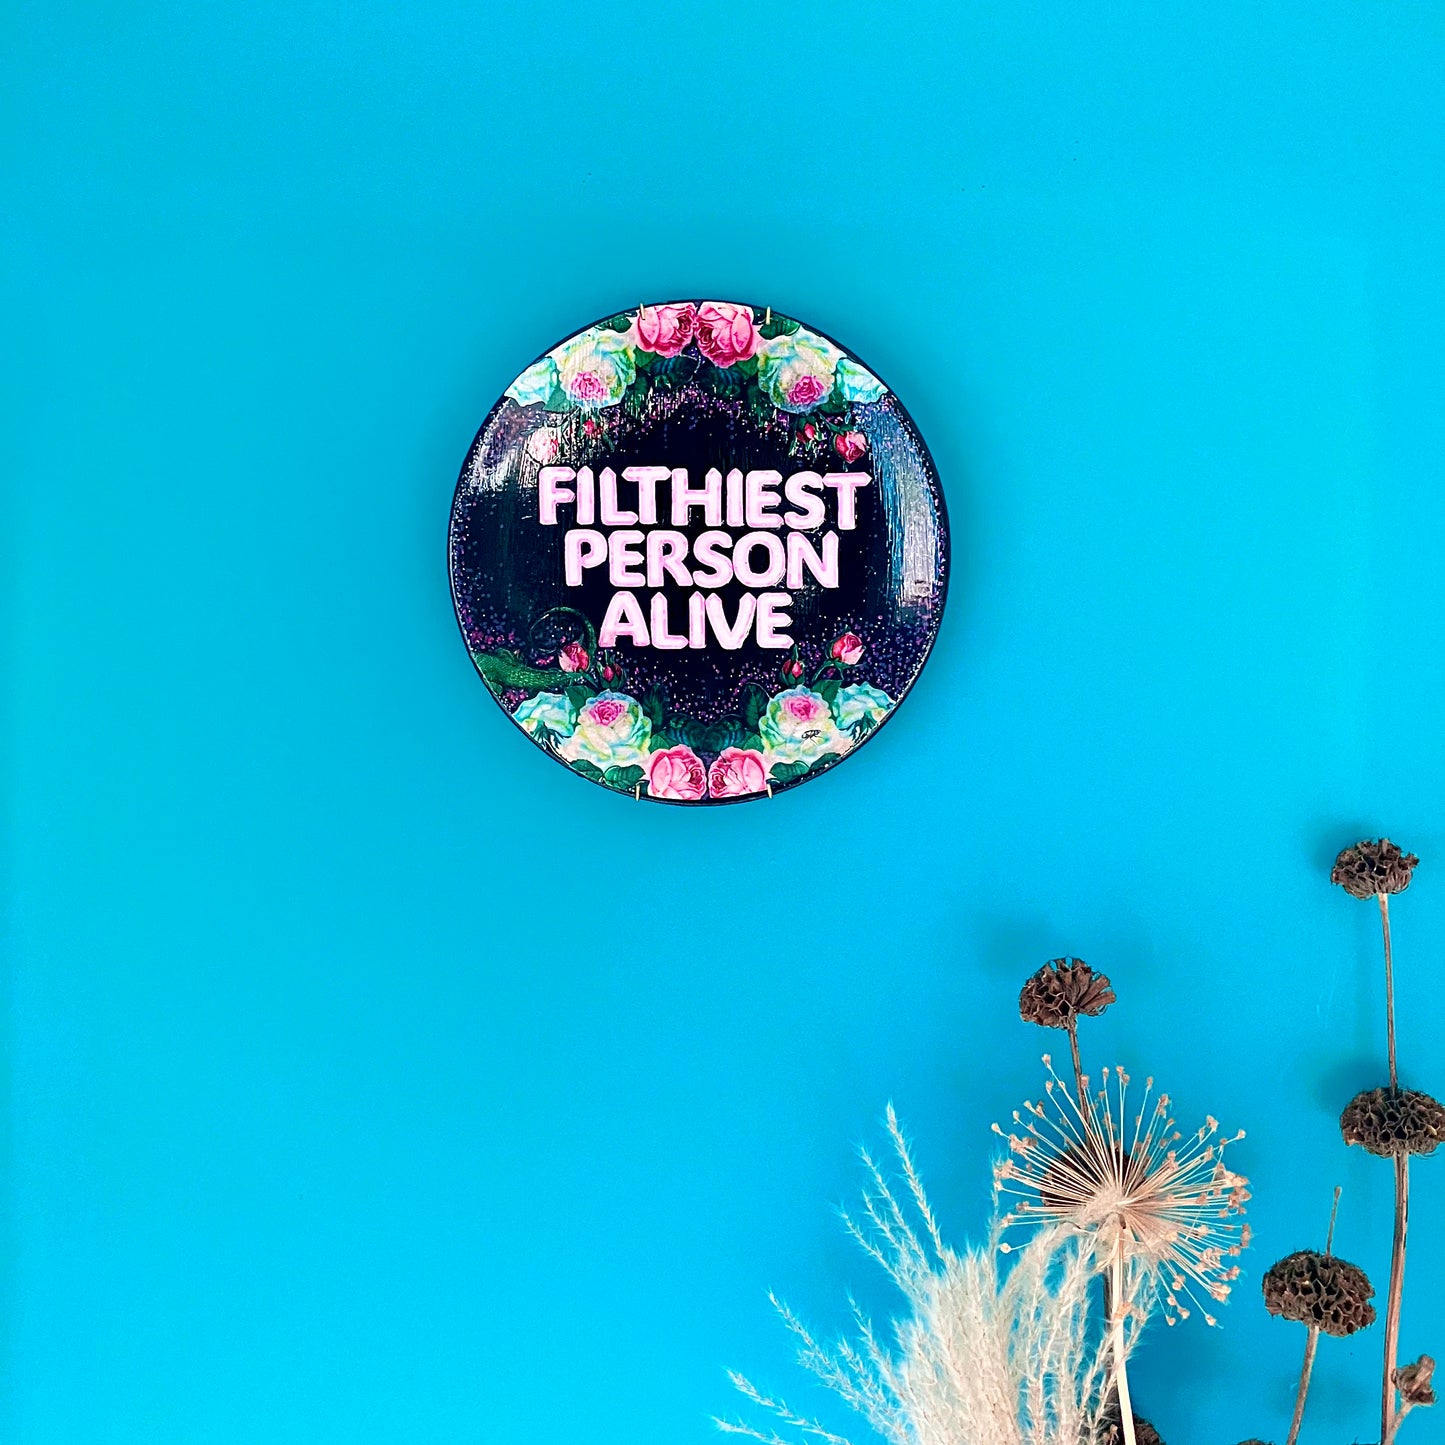 Black Upcycled Wall Plate - "Filthiest Person Alive" - by House of Frisson